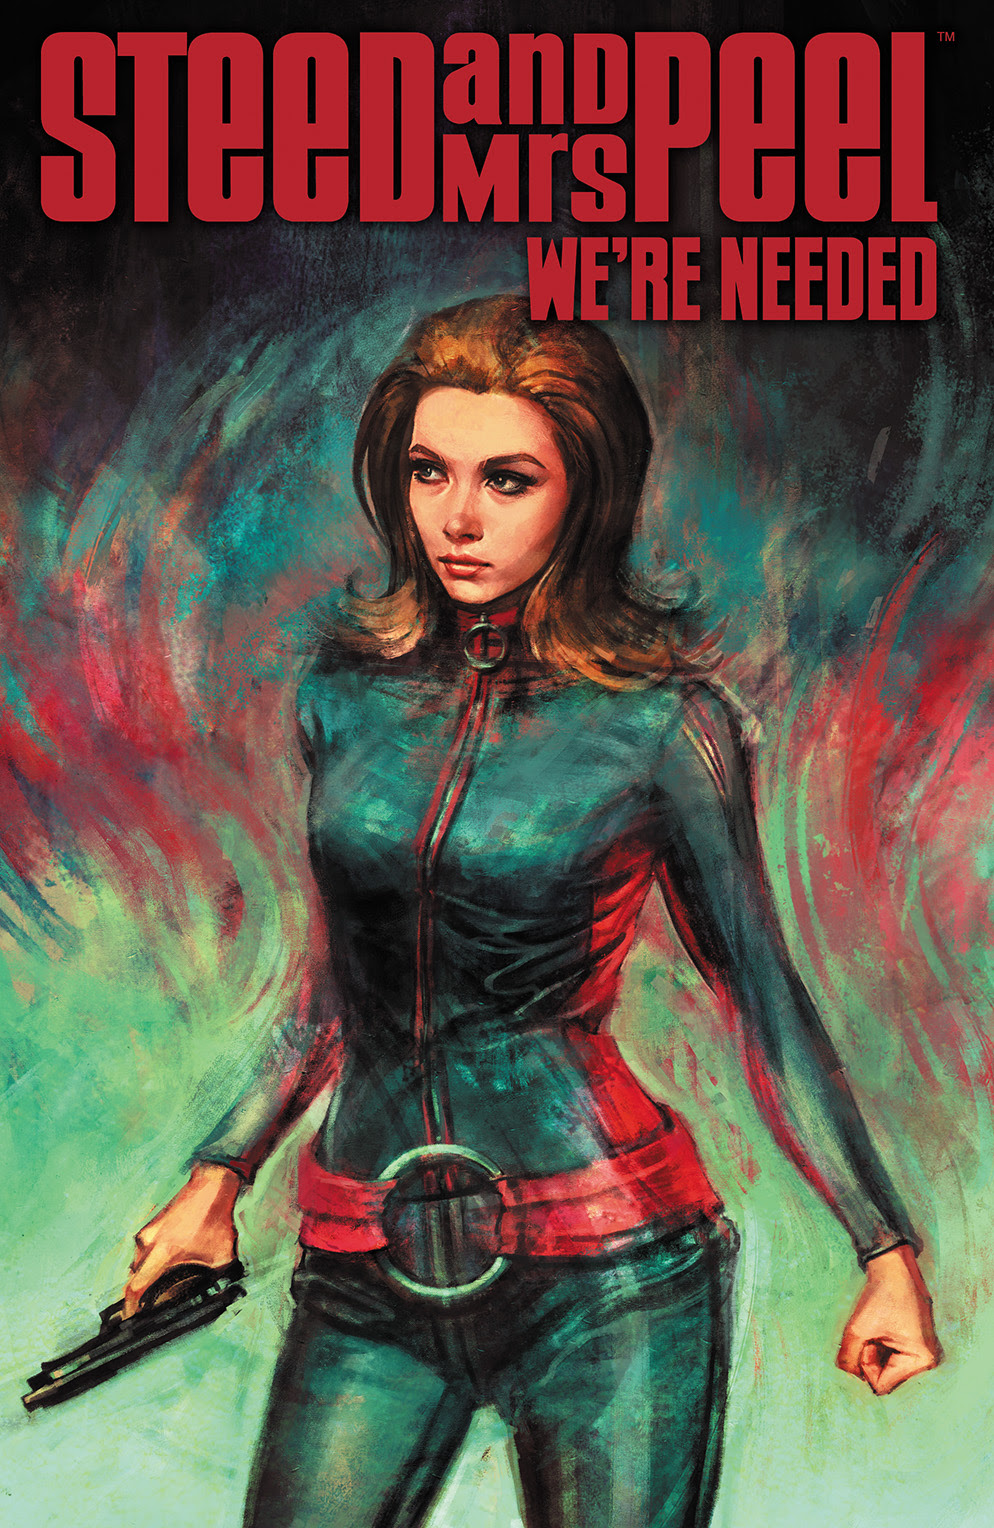 STEED AND MRS. PEEL: WE'RE NEEDED #2 Cover by Alice X. Zhang